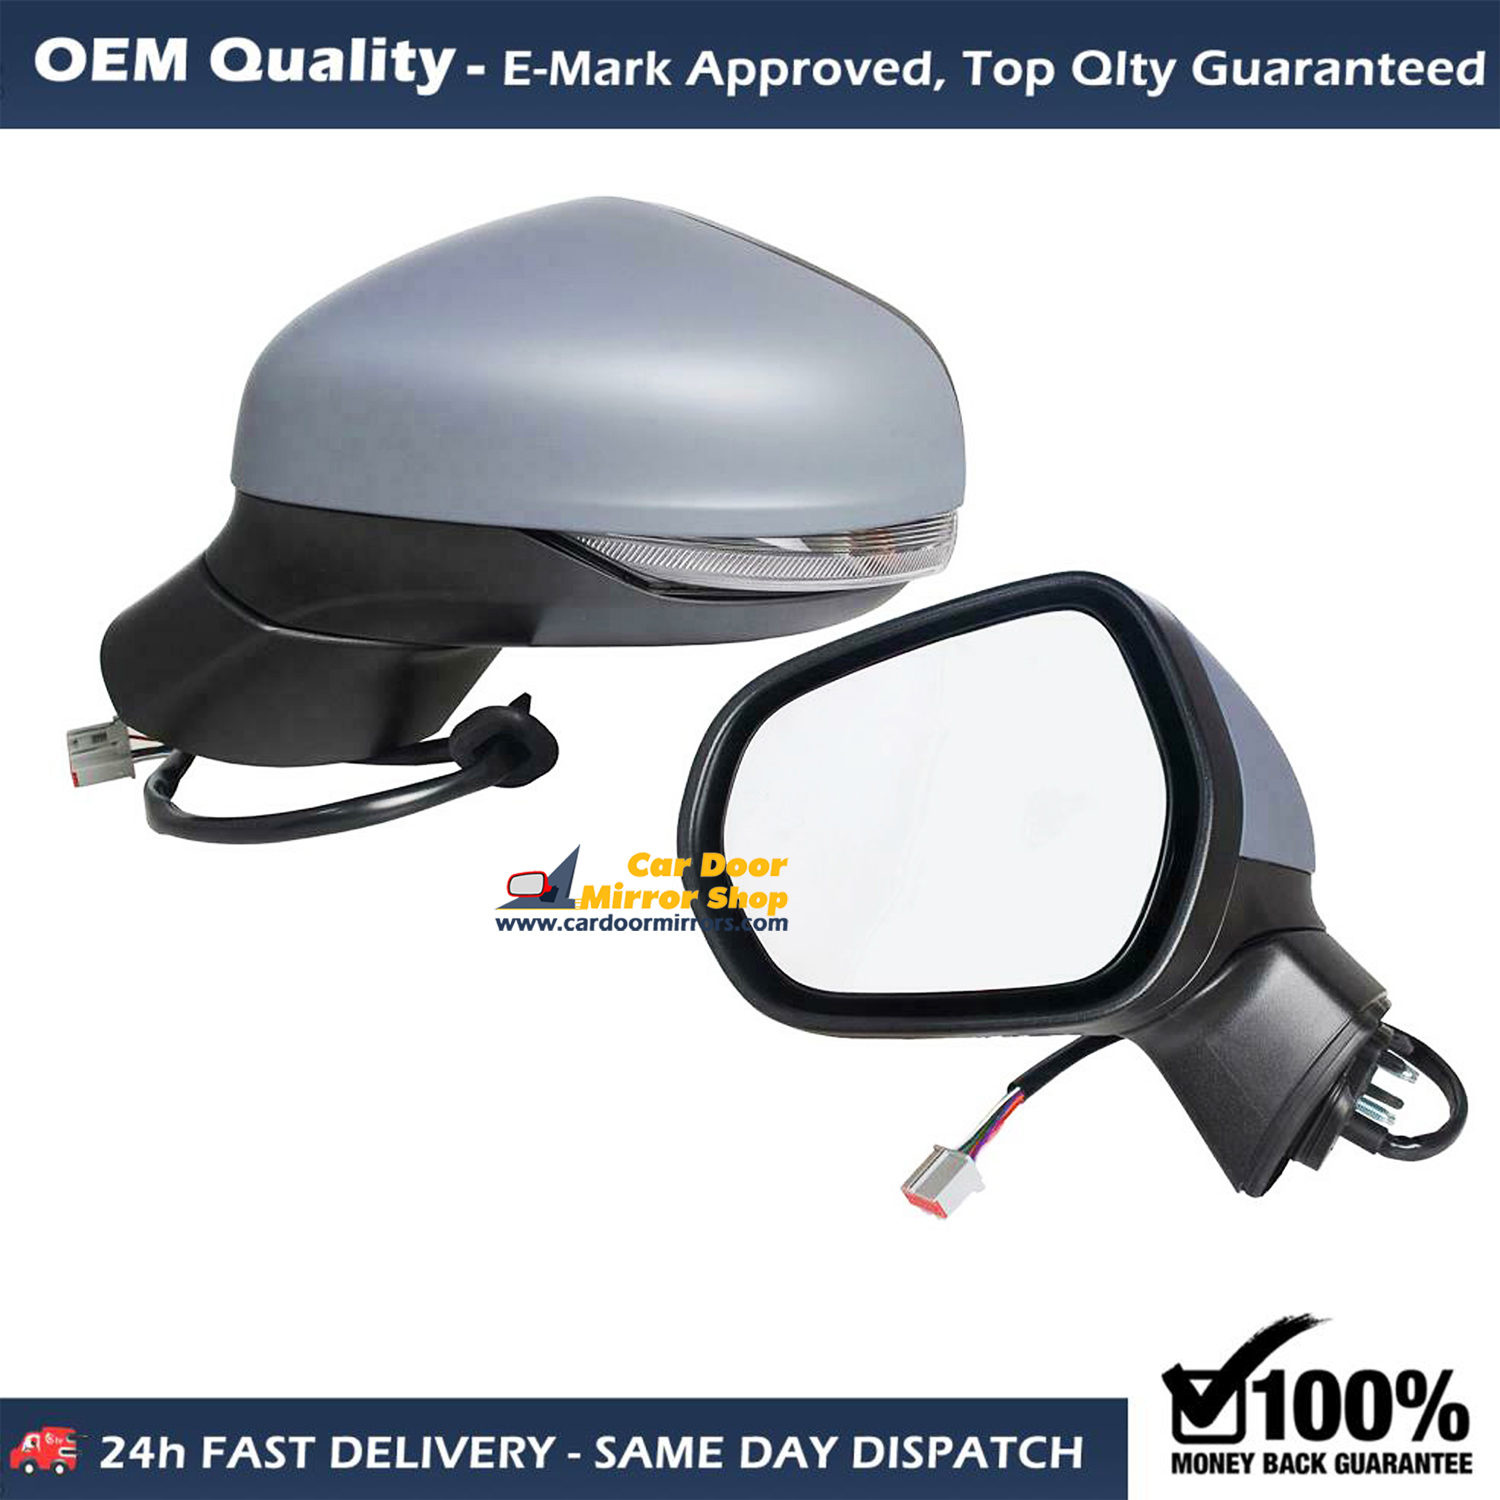 Ford Fiesta Complete Wing Mirror Unit LEFT HAND ( UK Passenger Side ) 2017 to 2020 – Electric Wing Mirror Unit